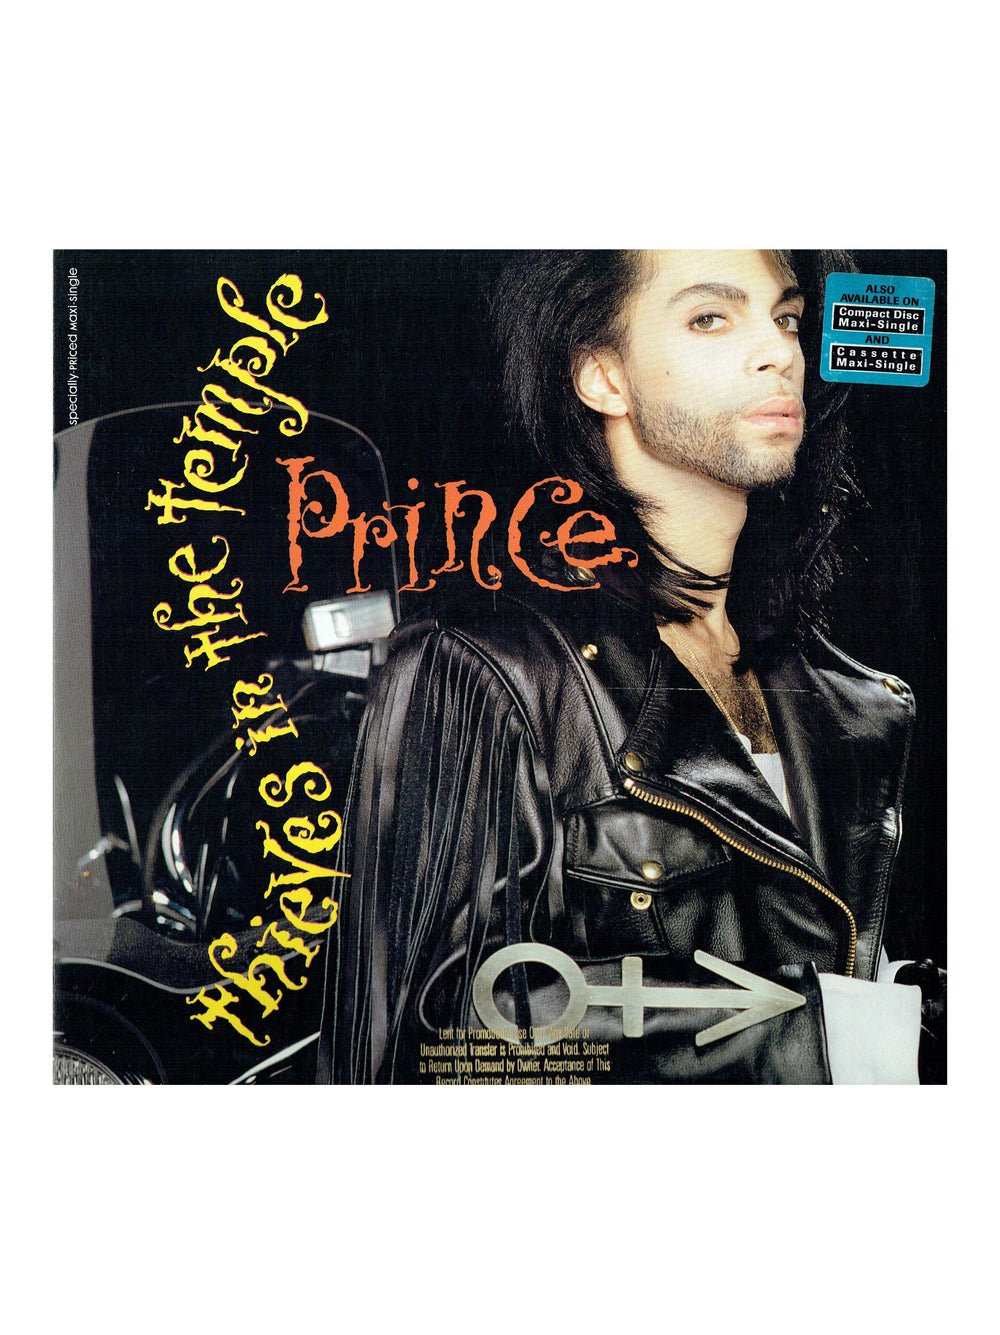 Prince – Thieves In The Temple Vinyl 12" Maxi Single US Preloved: 1990